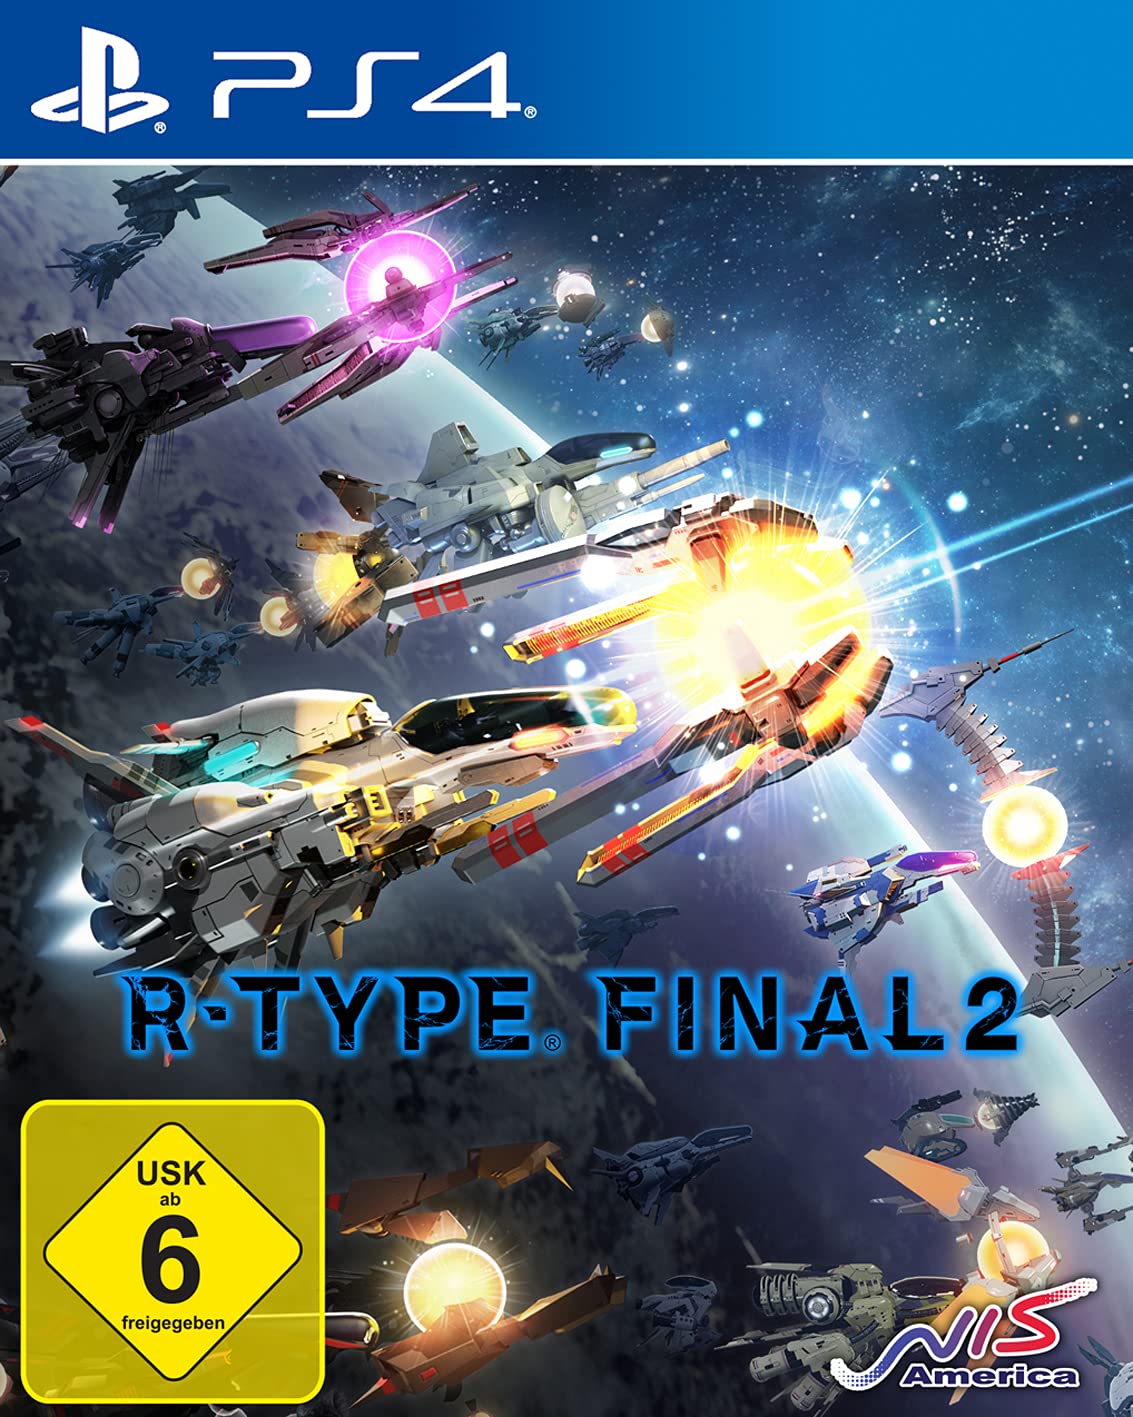 R-Type Final 2 - Inaugural Flight Edition - [PS4]